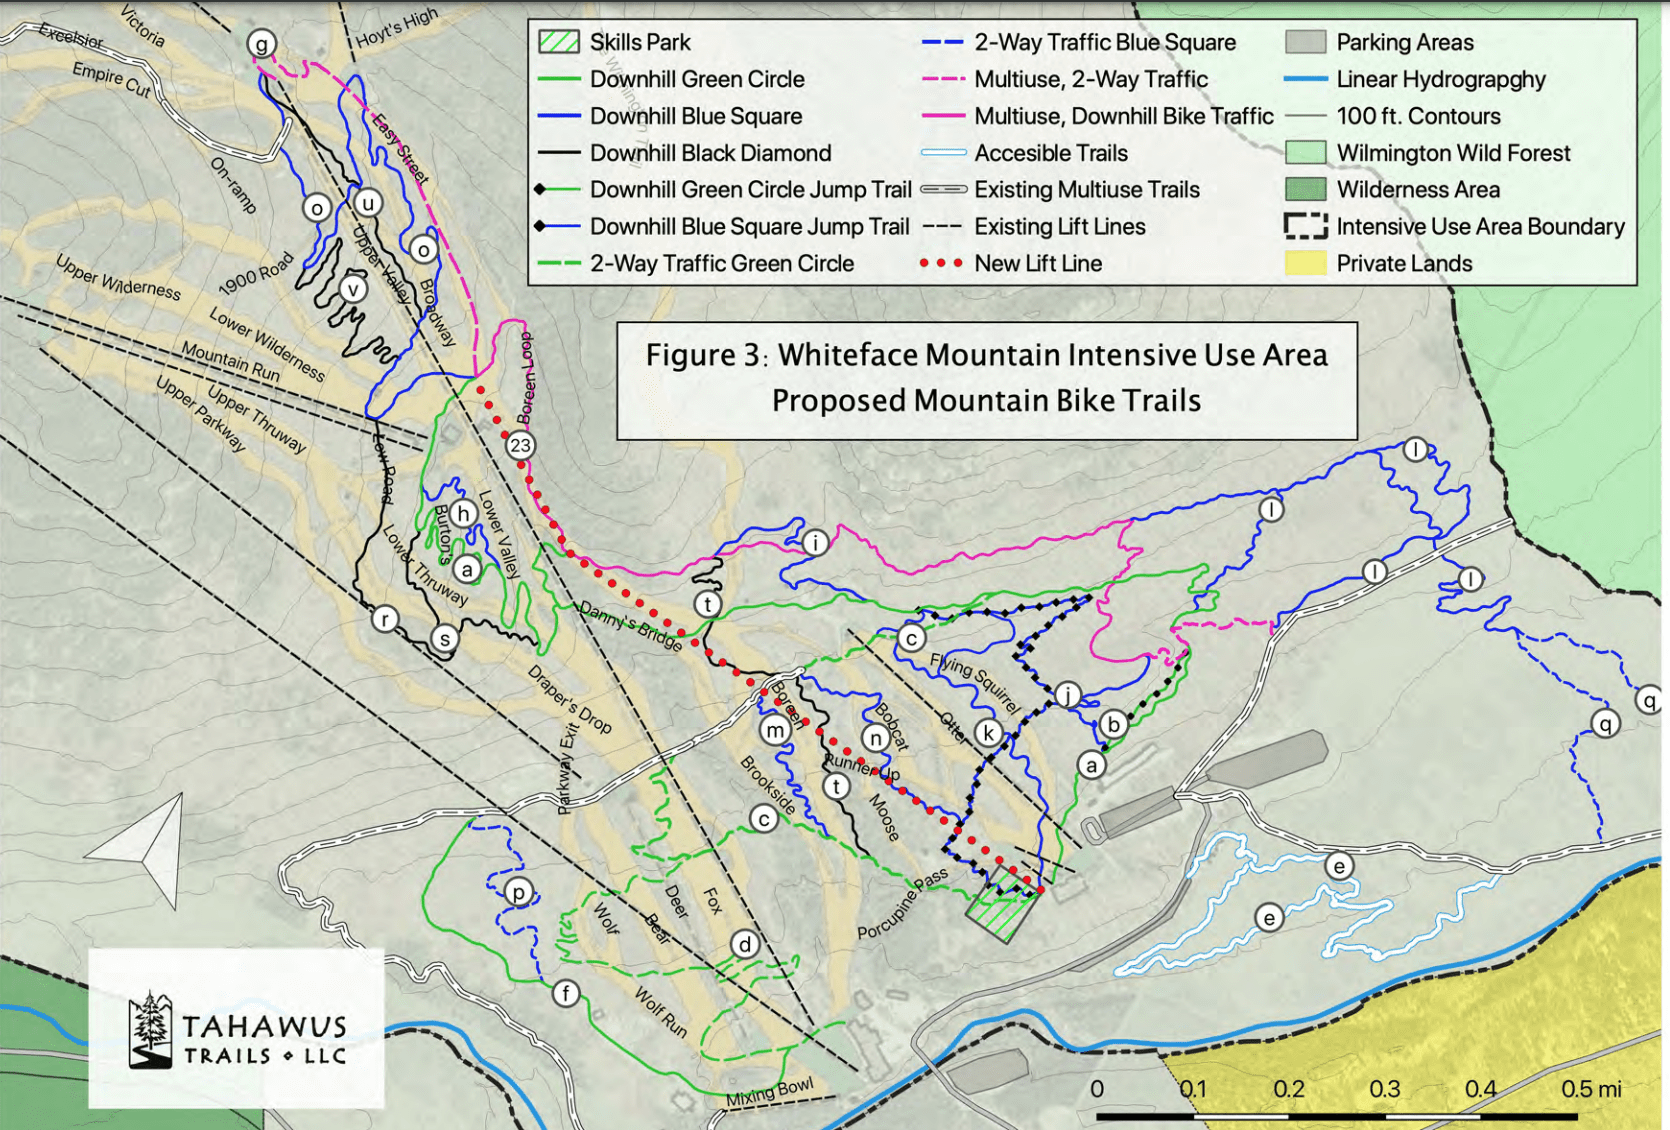 Proposed mountain biking trails for Whiteface Mountain